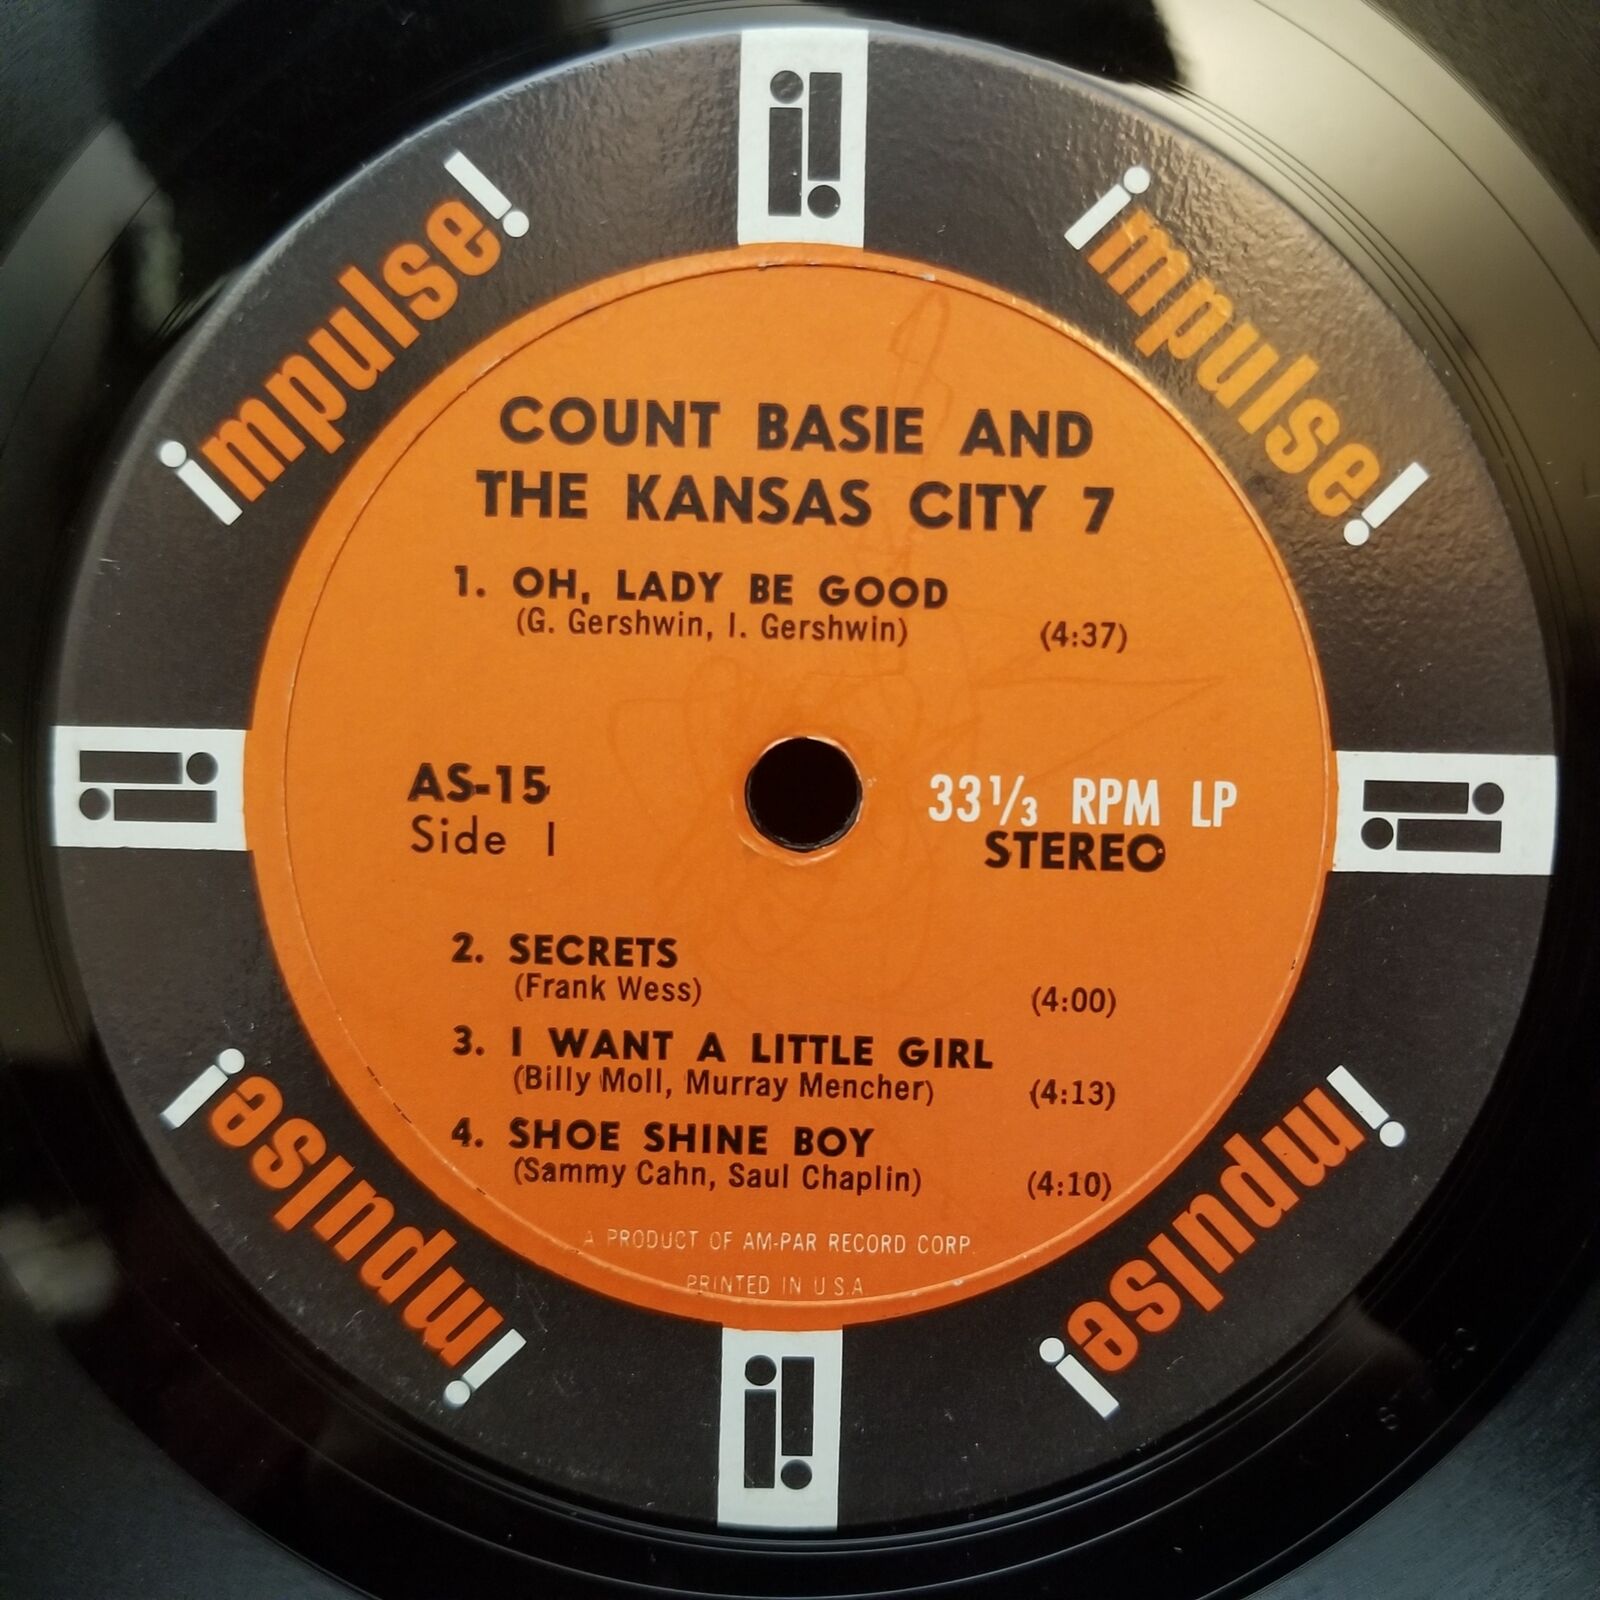 count basie and the kansas city 7 3.